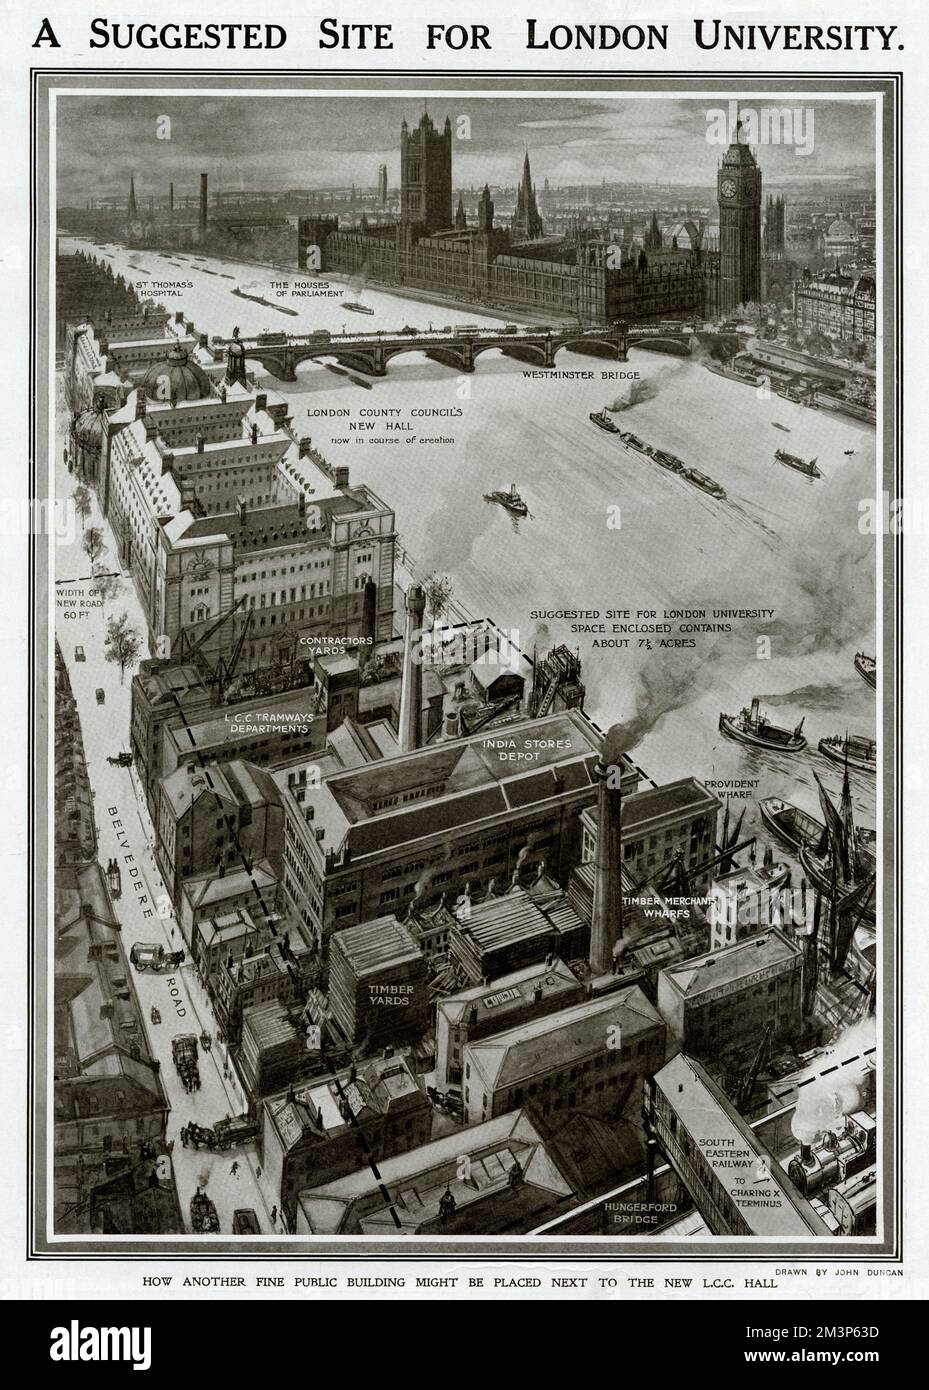 A suggested site for London University: how another fine building might be placed next to the new LCC Hall (later known as County Hall).  Showing the South Bank of the River Thames alongside Belvedere Road, where the space earmarked contains industrial buildings such as stores and depots.    1912 Stock Photo